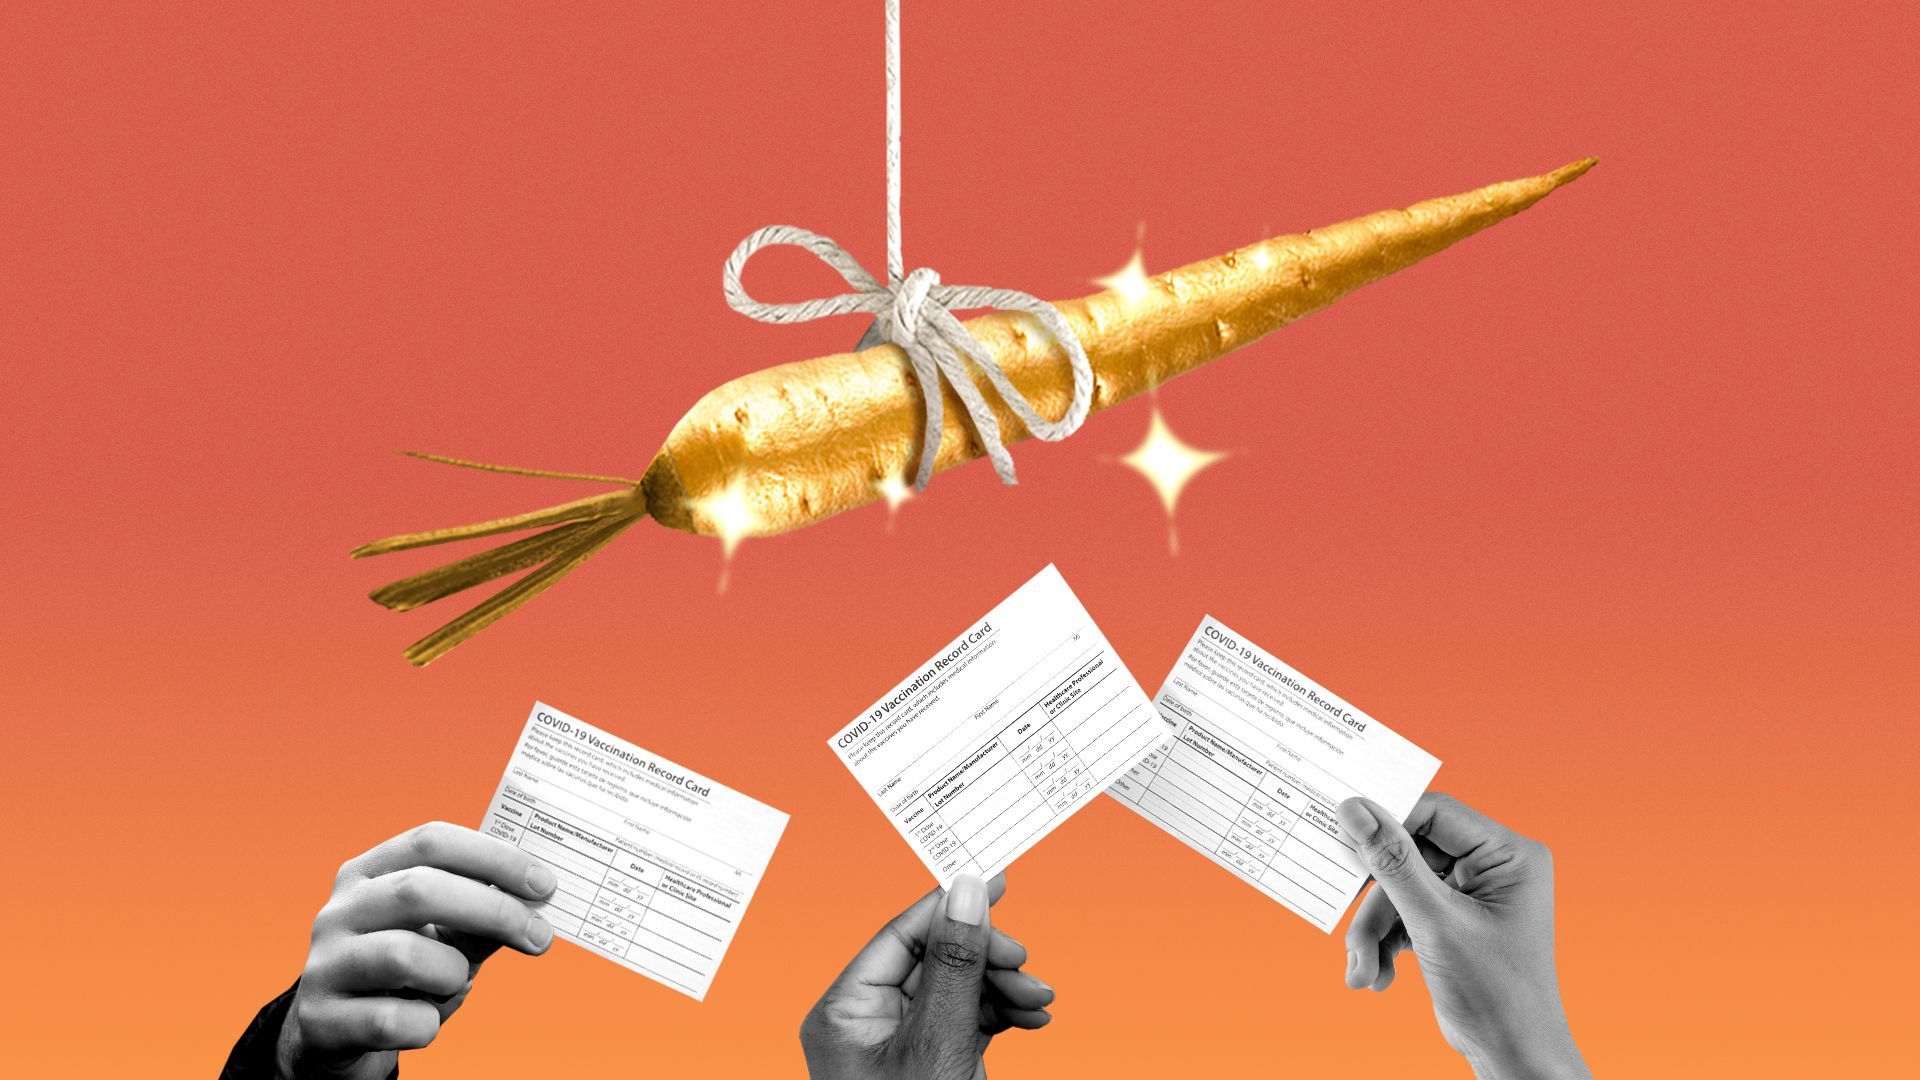 Illustration of three people's hands holding vaccine cards up towards a dangling golden carrot